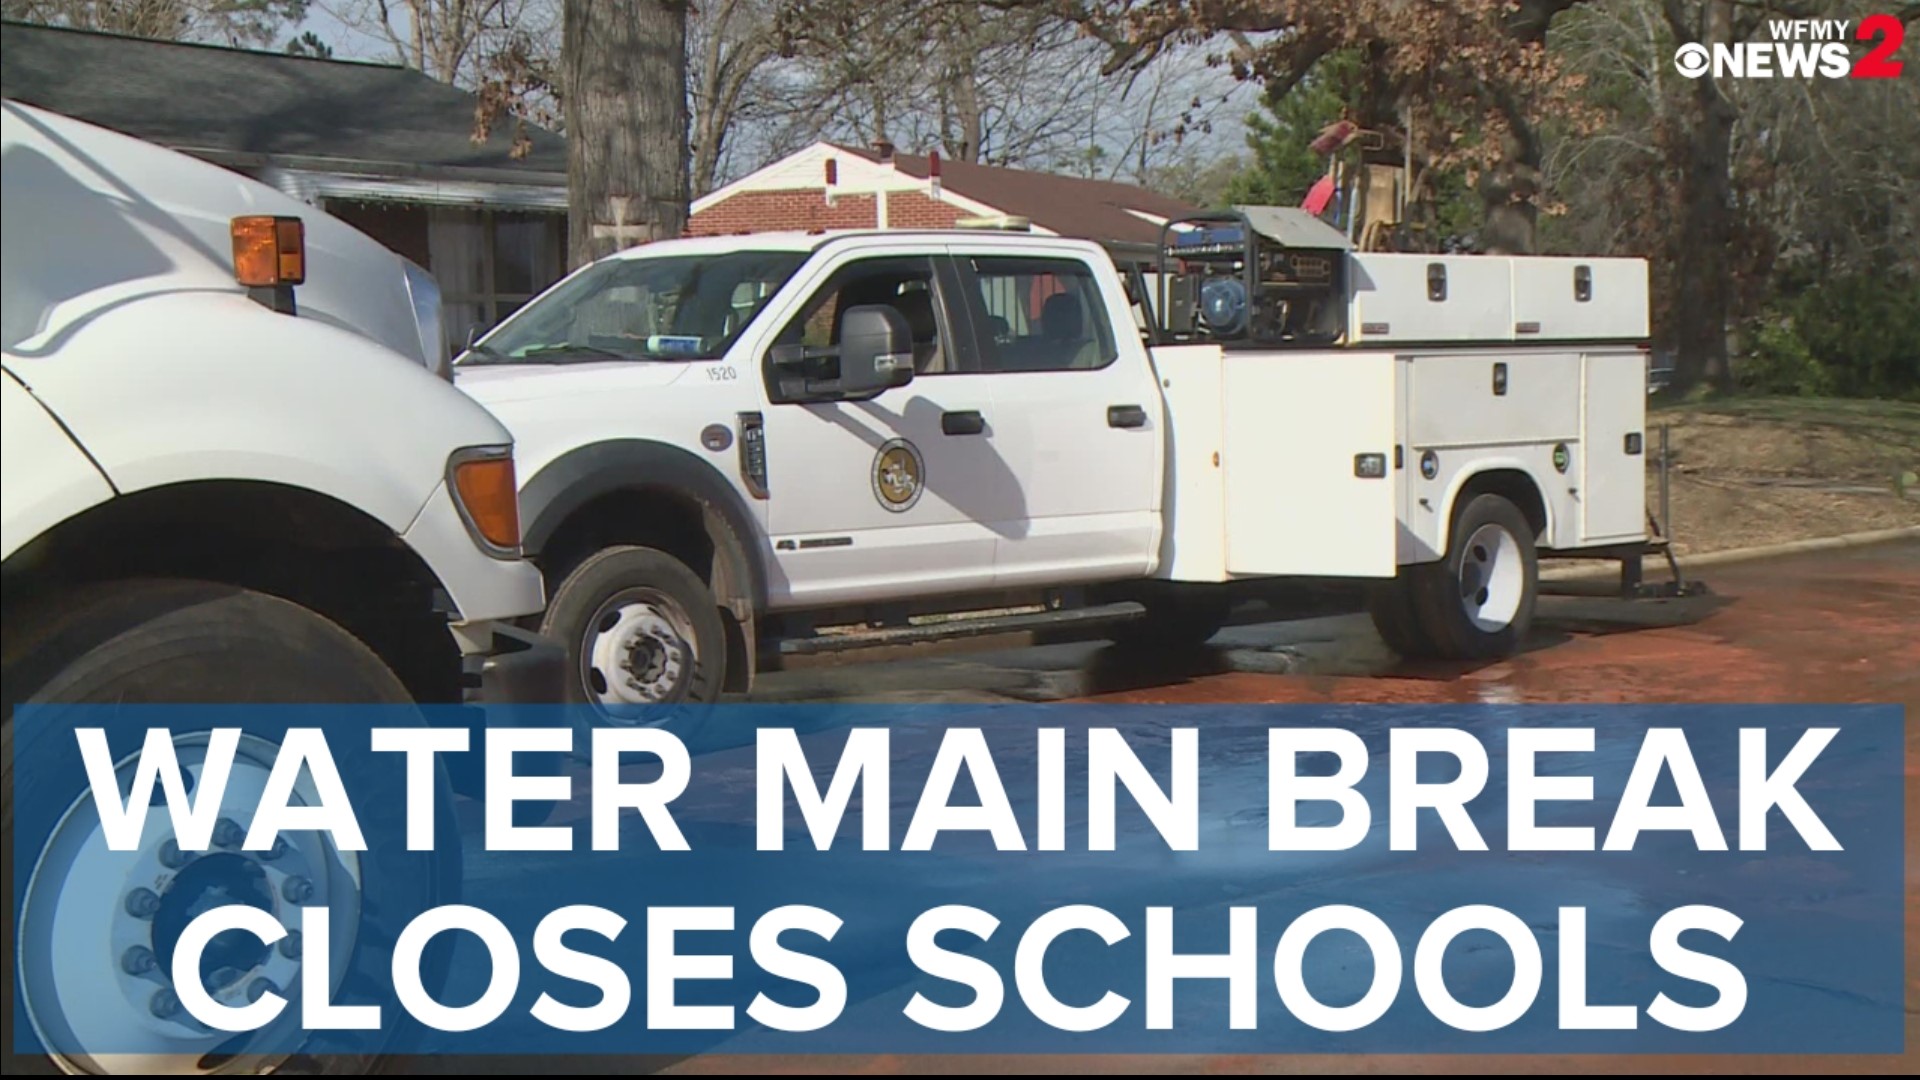 A pipe burst in Burlington Wednesday, forcing two schools to close for the day. Burlington Animal Services also lost water.